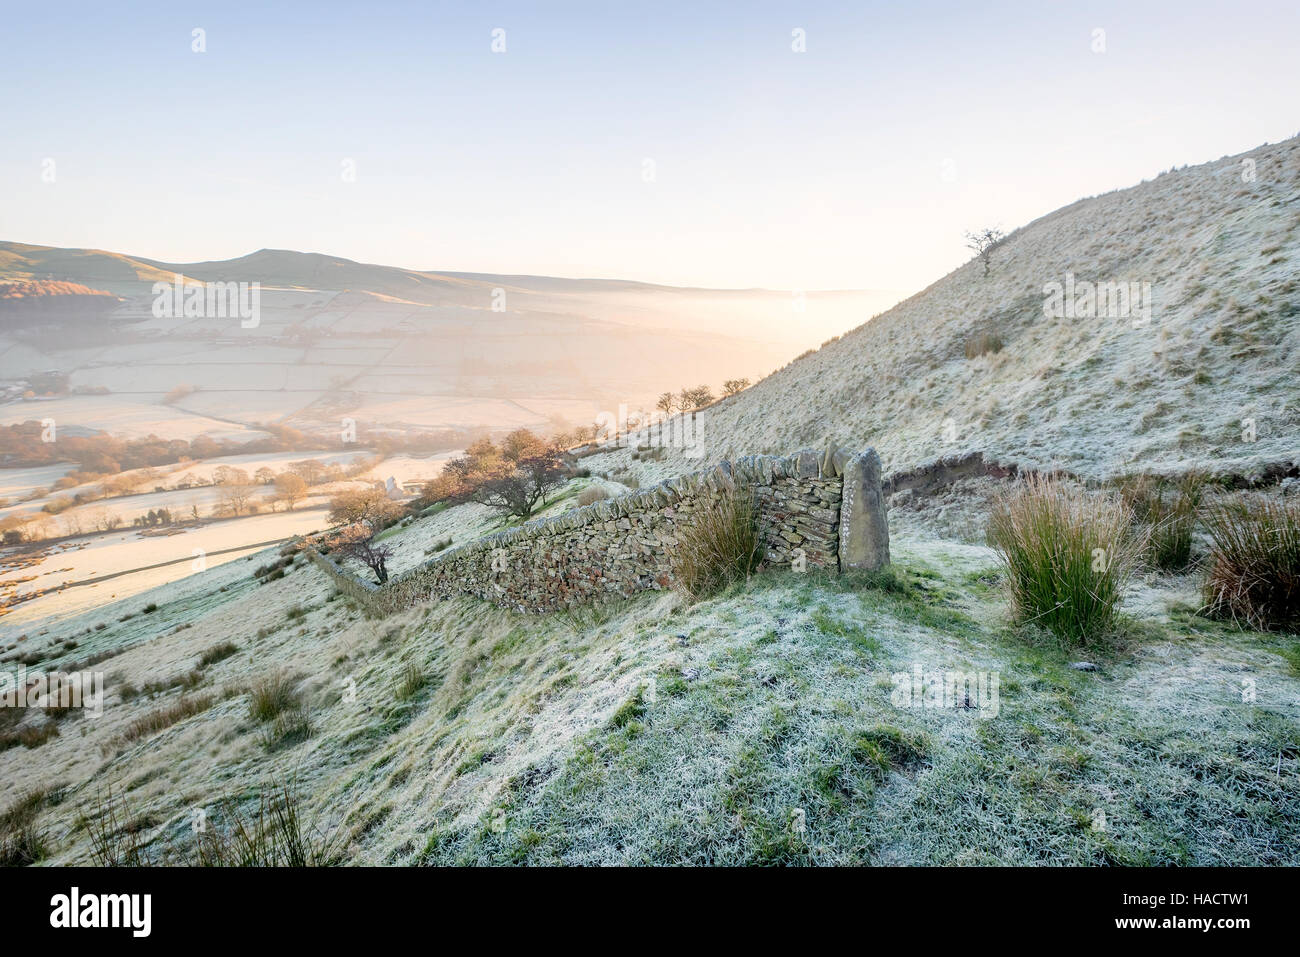 Dry stone wall on a frosty morning at Cracken Edge in the High Peak District, England Stock Photo